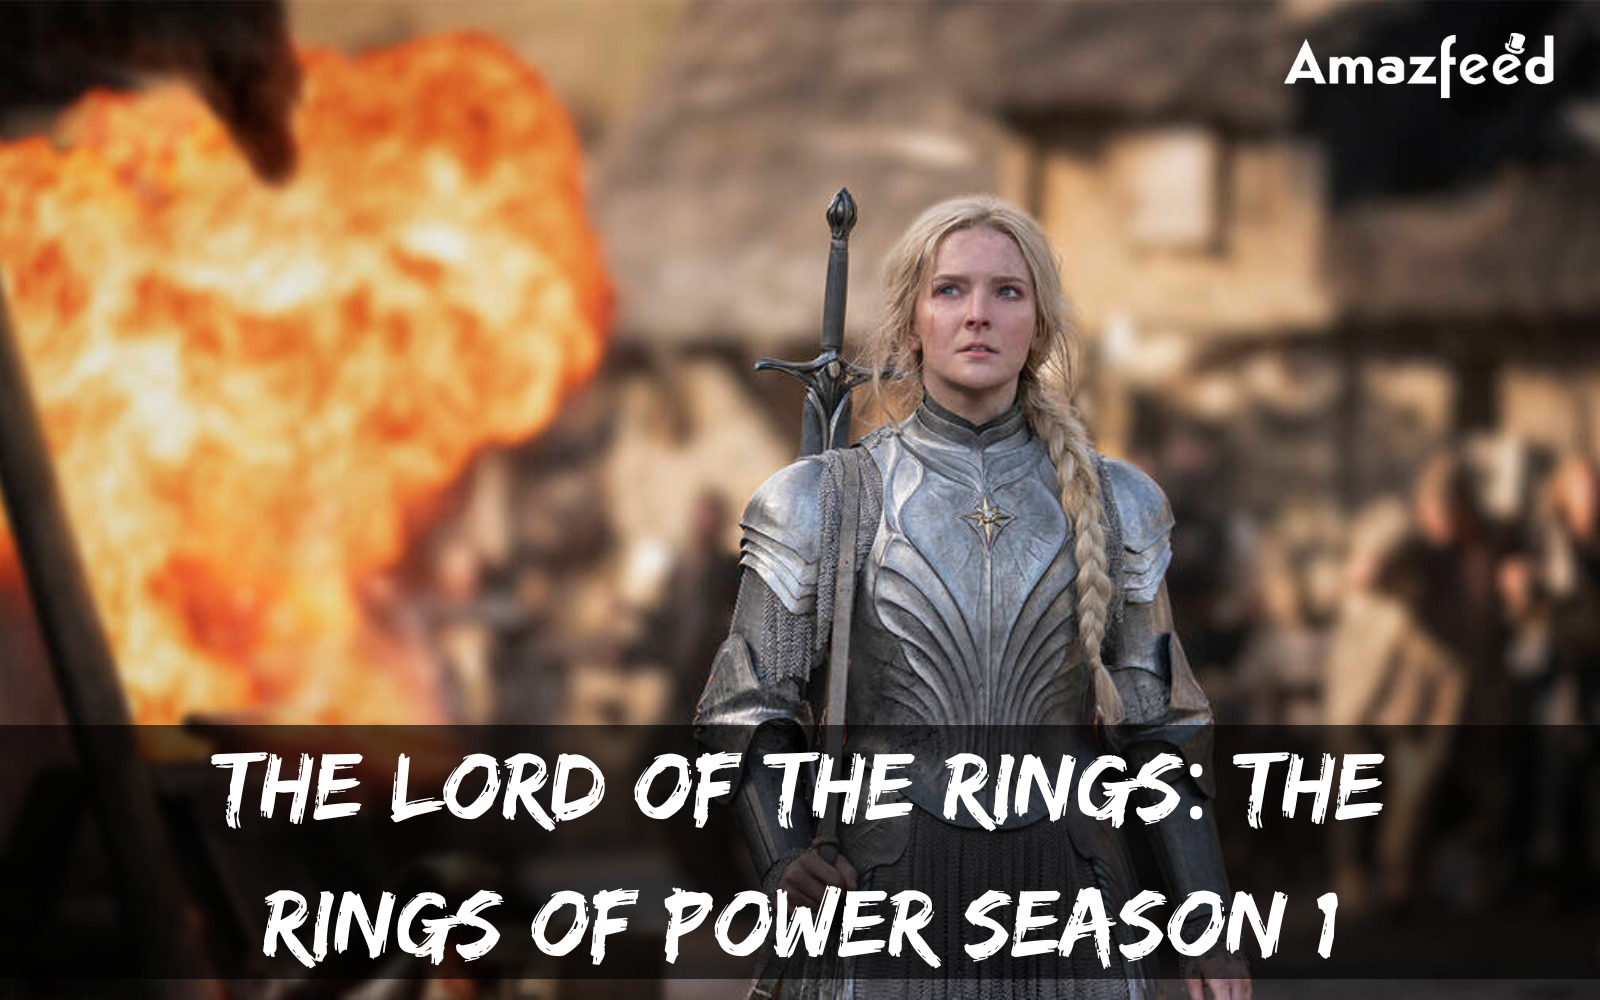 When Is The Lord of the Rings The Rings of Power Season 1 Coming Out